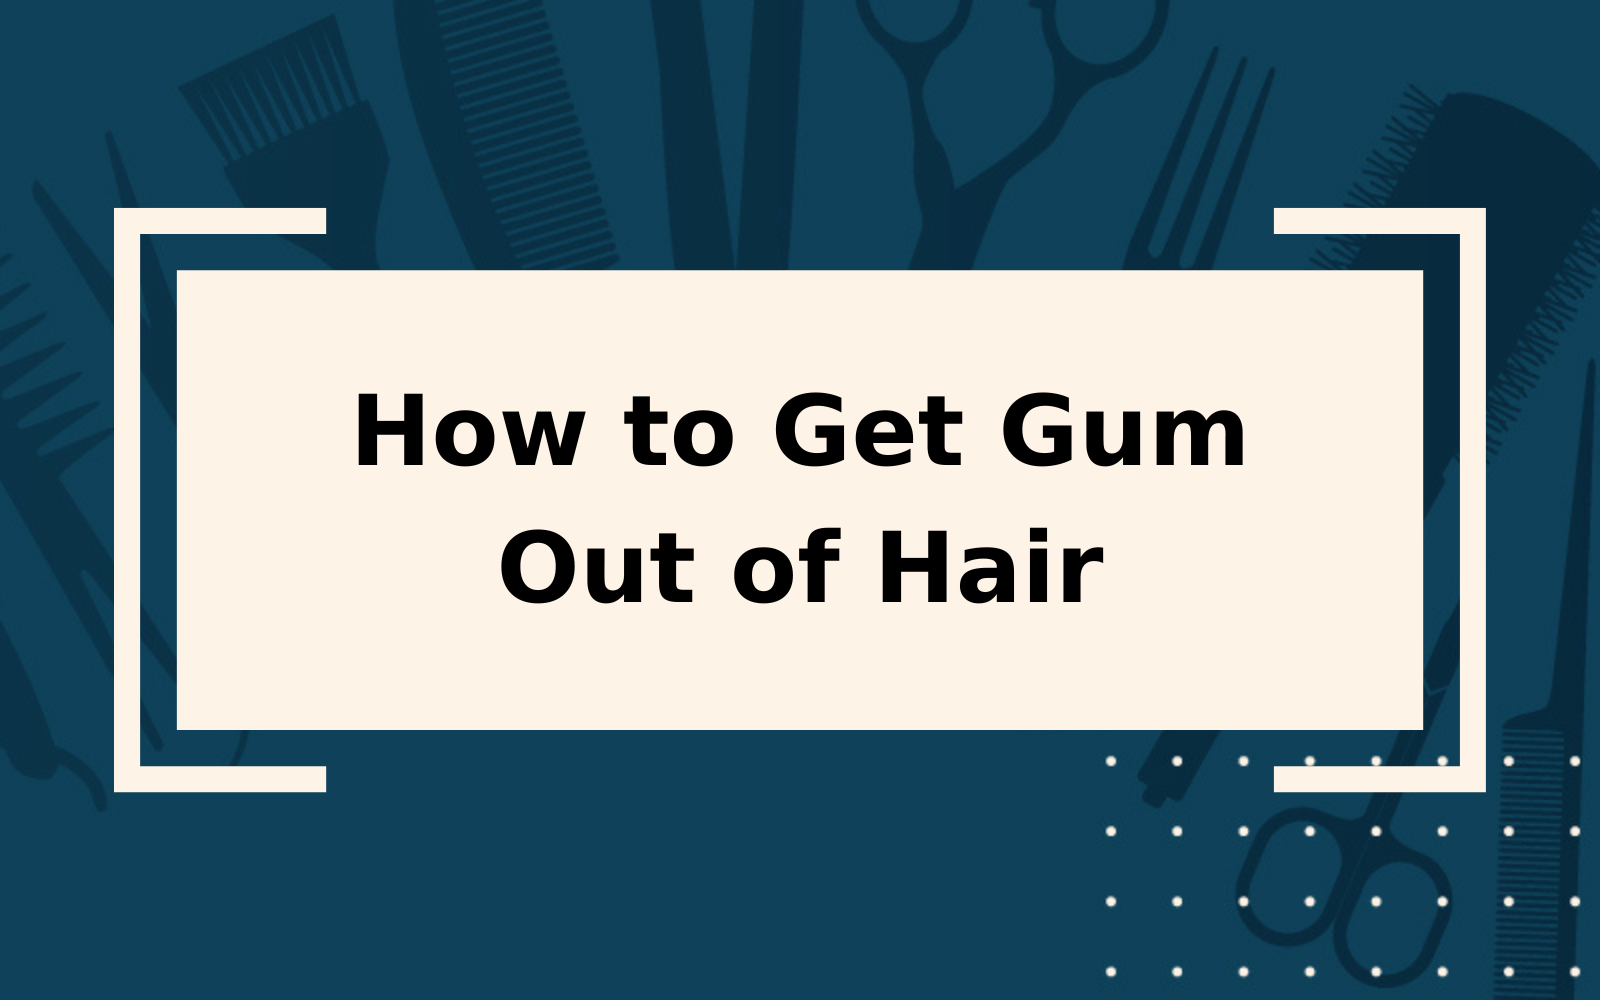 How to Get Gum Out of Hair | It’s Much Easier Than You Think